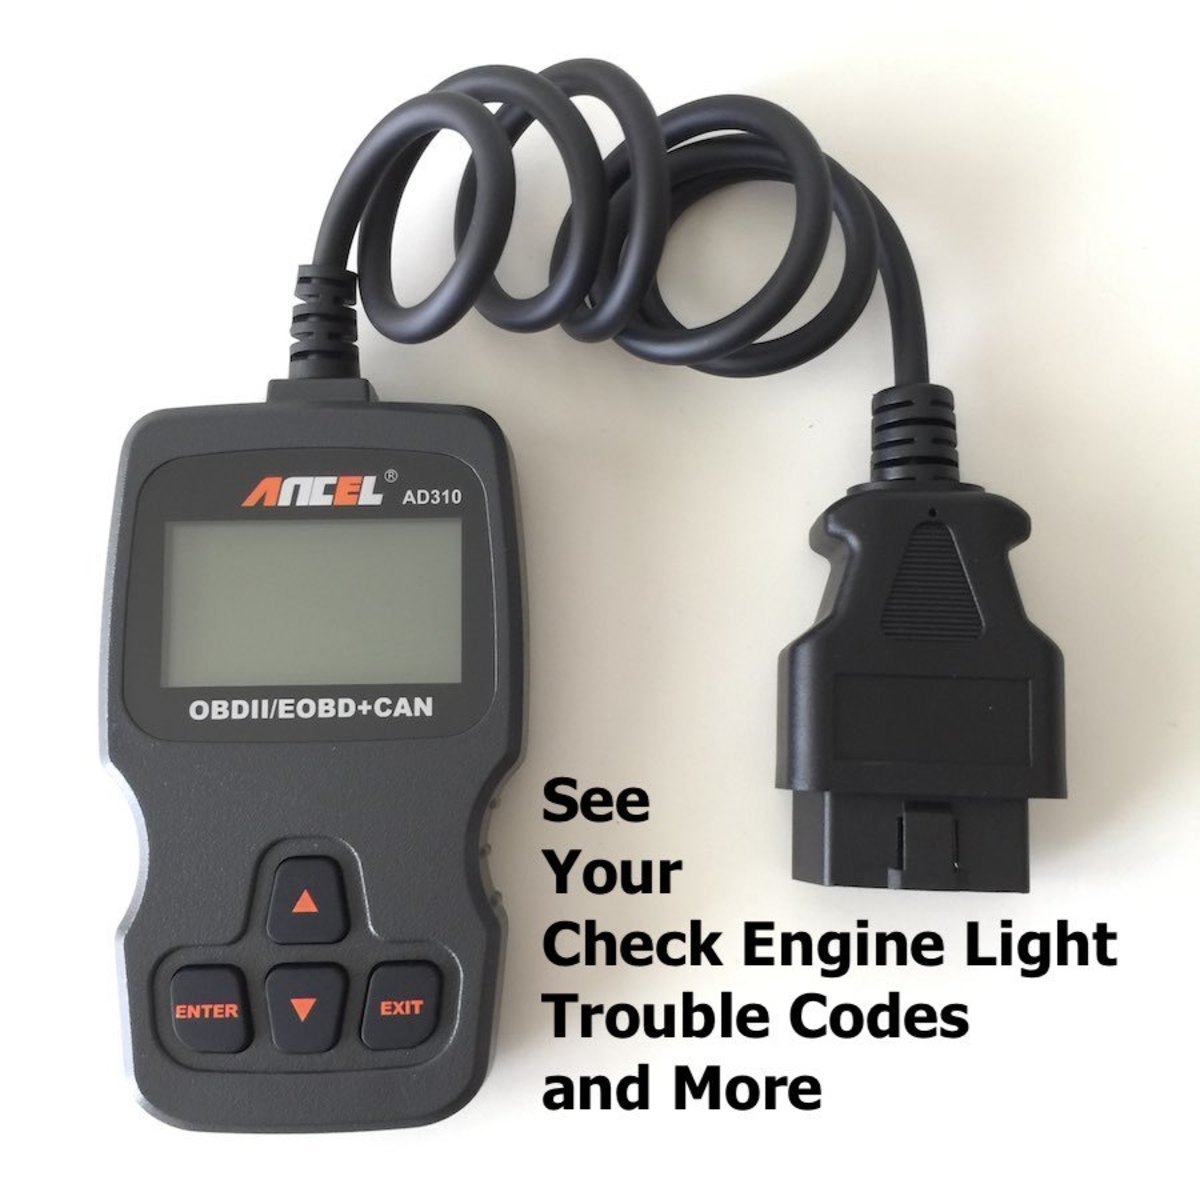 How to Read Your Vehicle’s Check Engine Light Trouble Codes